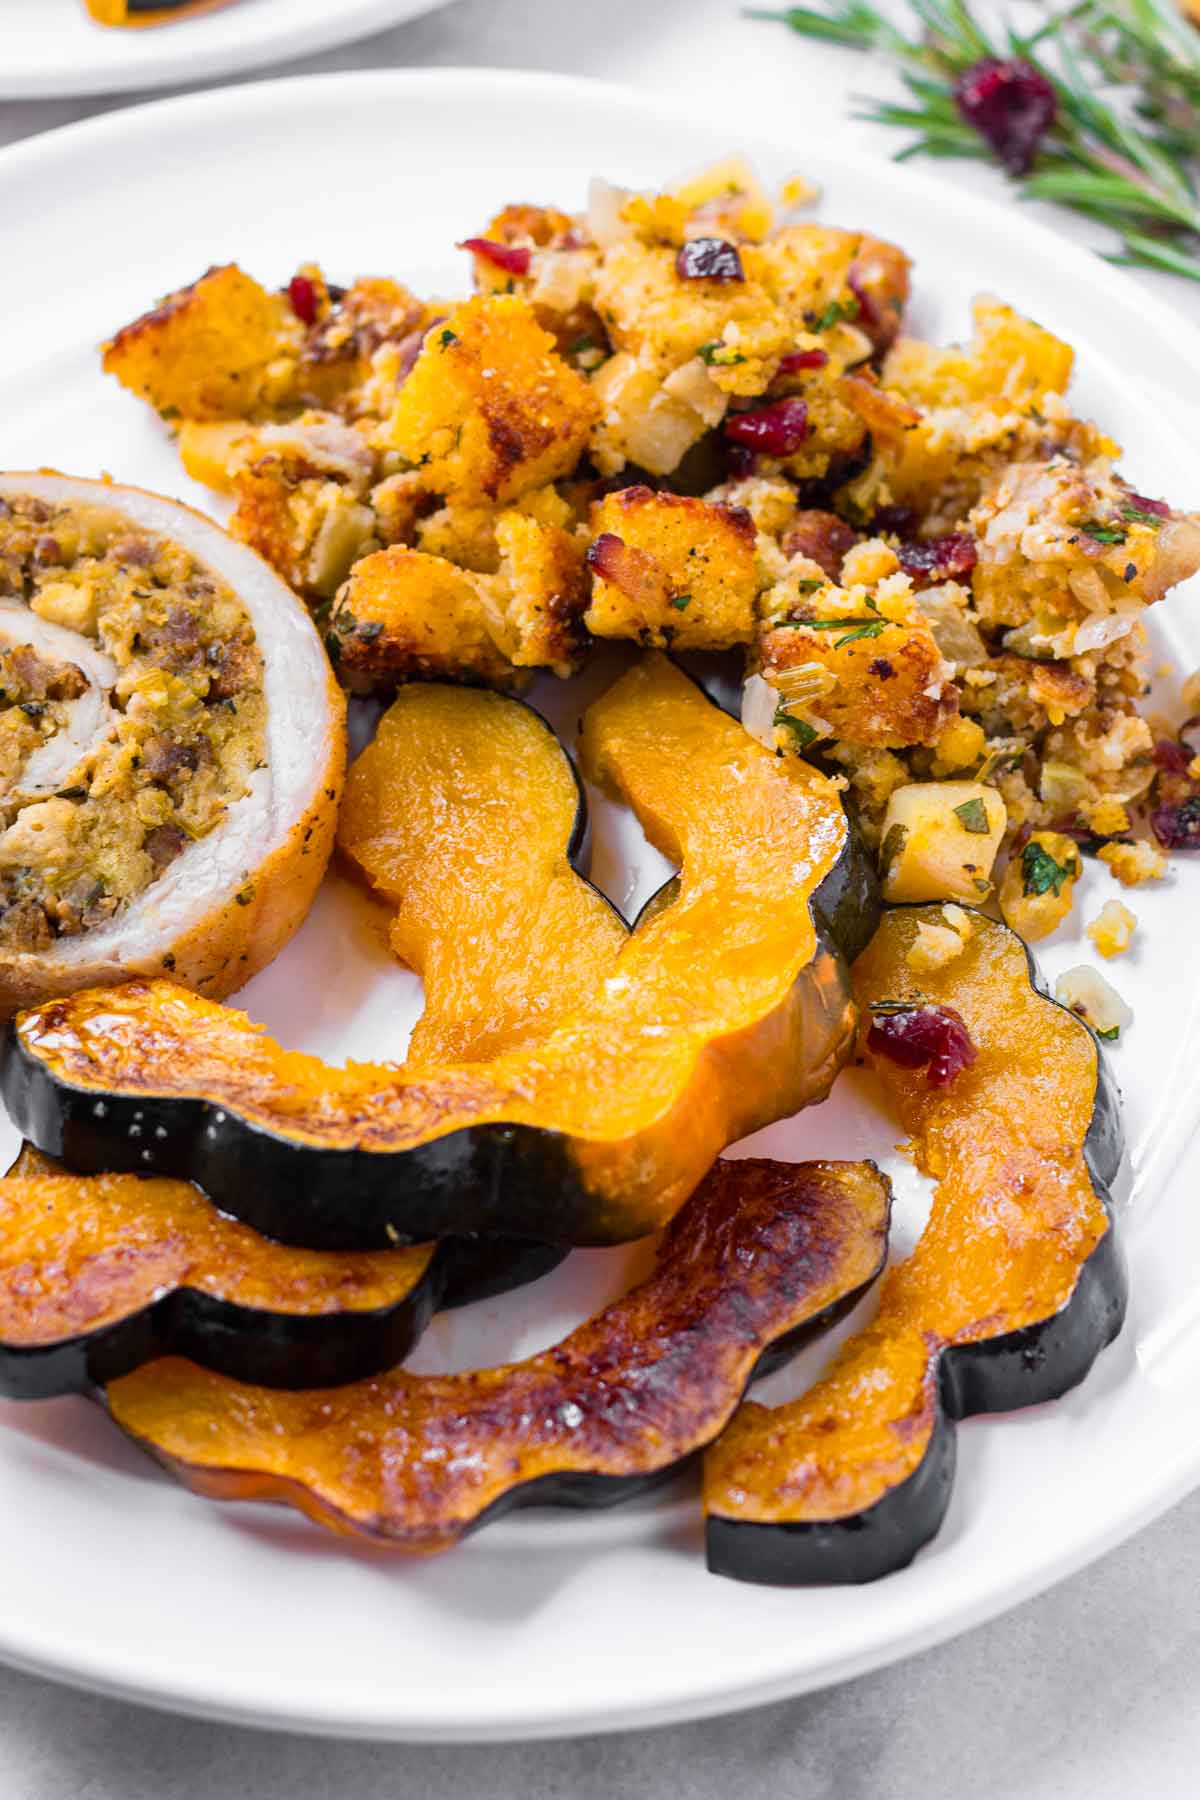 acorn squash served with stuffing